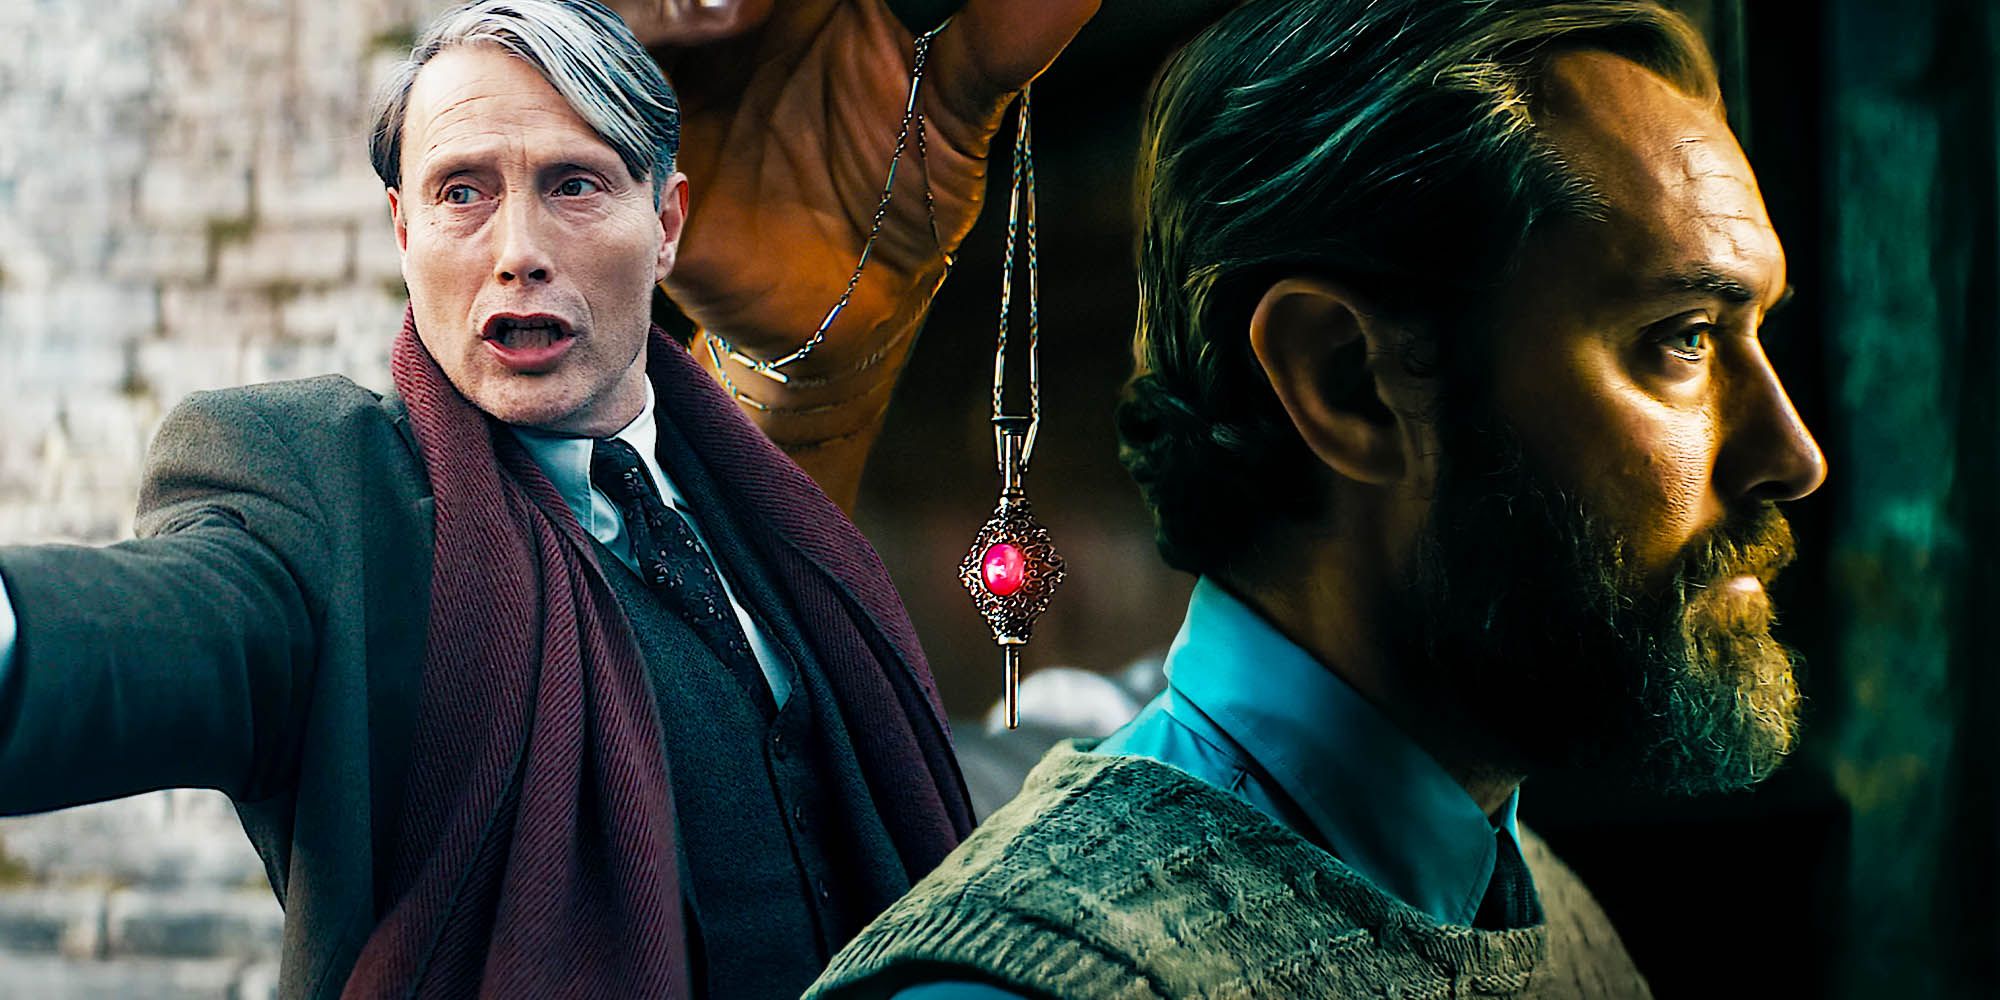 Fantastic Beasts Grindelwald blood pact makes dumbledores conflict worse